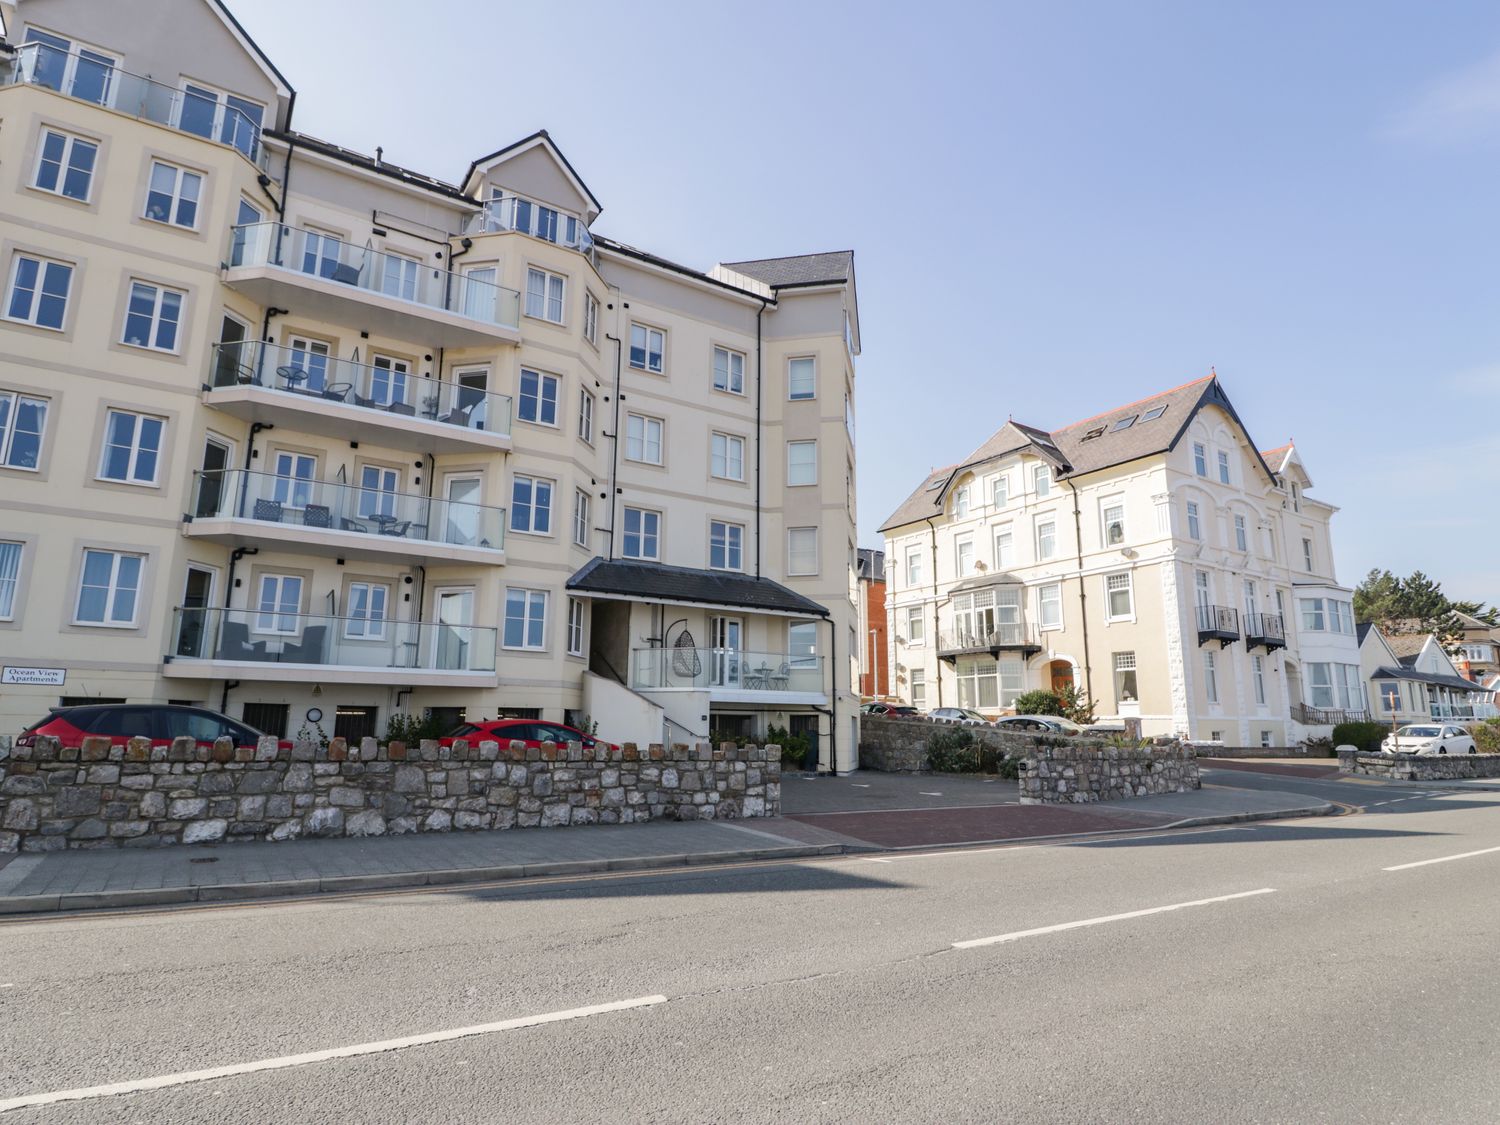 Ocean View Apartment - North Wales - 1066096 - photo 1